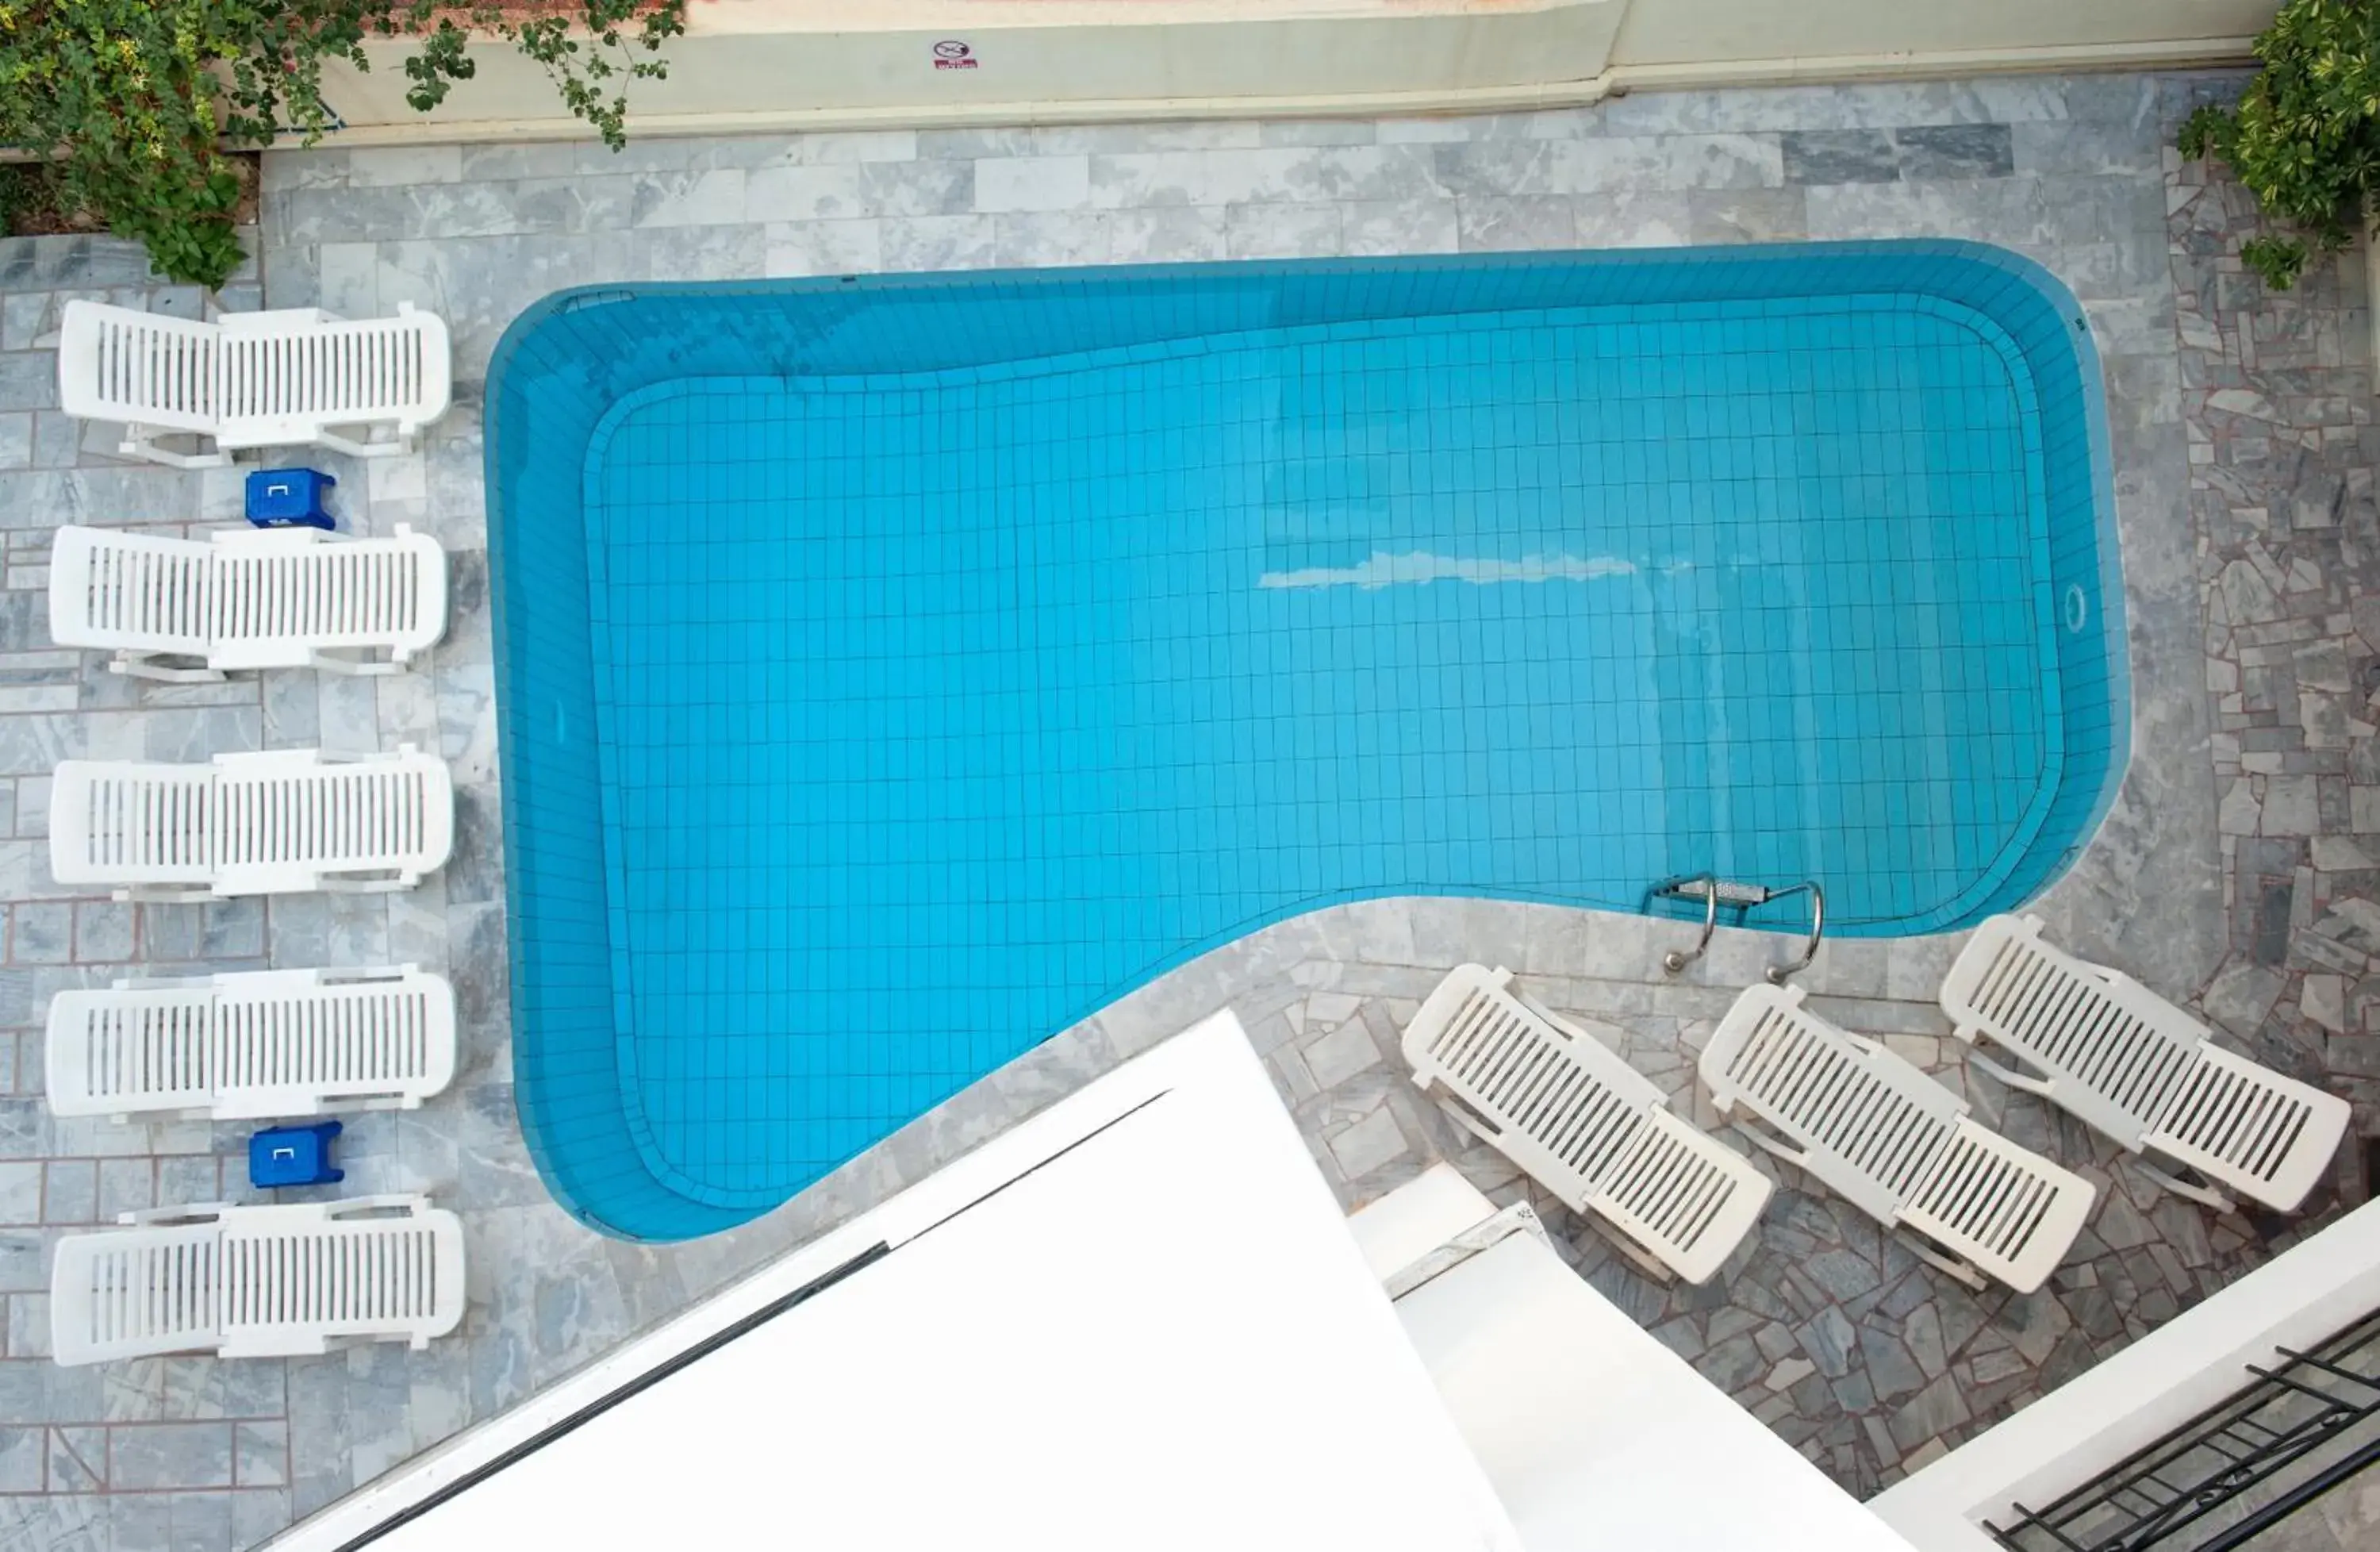 On site, Swimming Pool in Artemis Hotel Apartments